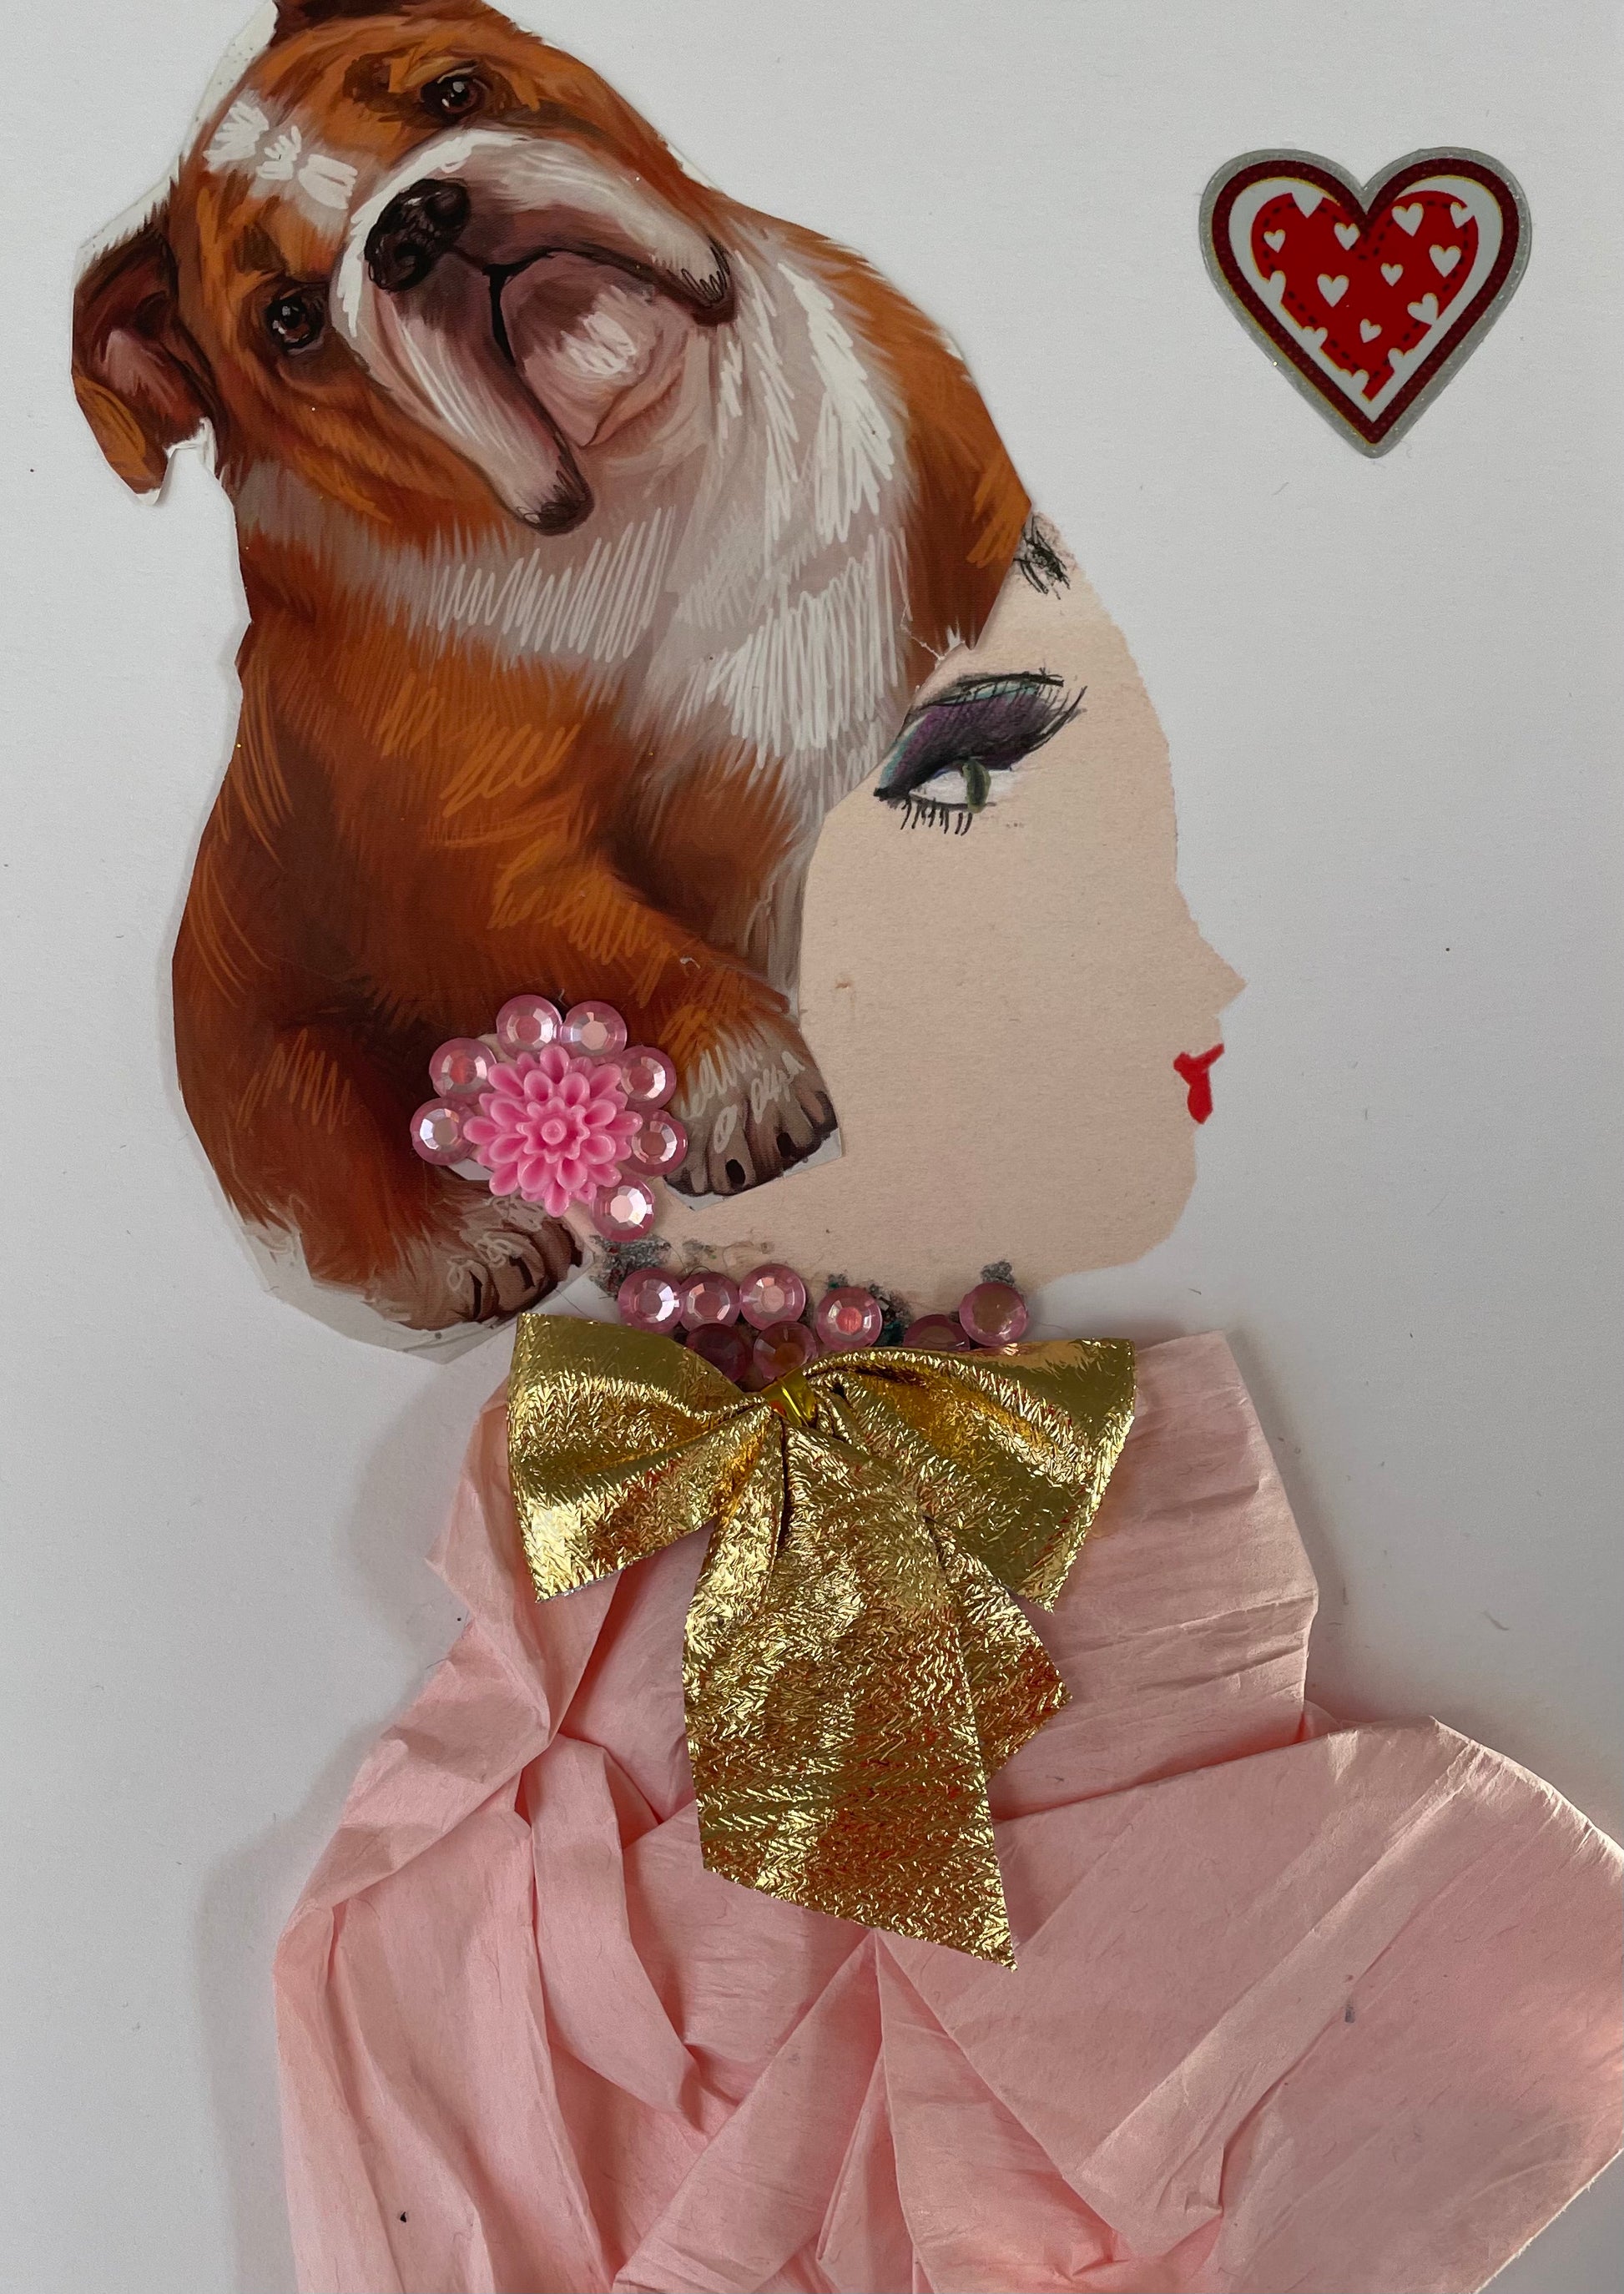 Lady Whitney Whimsical is depicted wearing a light pink blouse with a gold bow, along with a hot pink gemstone necklace and pink earrings. Completing the ensemble, a dog is utilized as a headpiece, with a red heart appearing to the right.